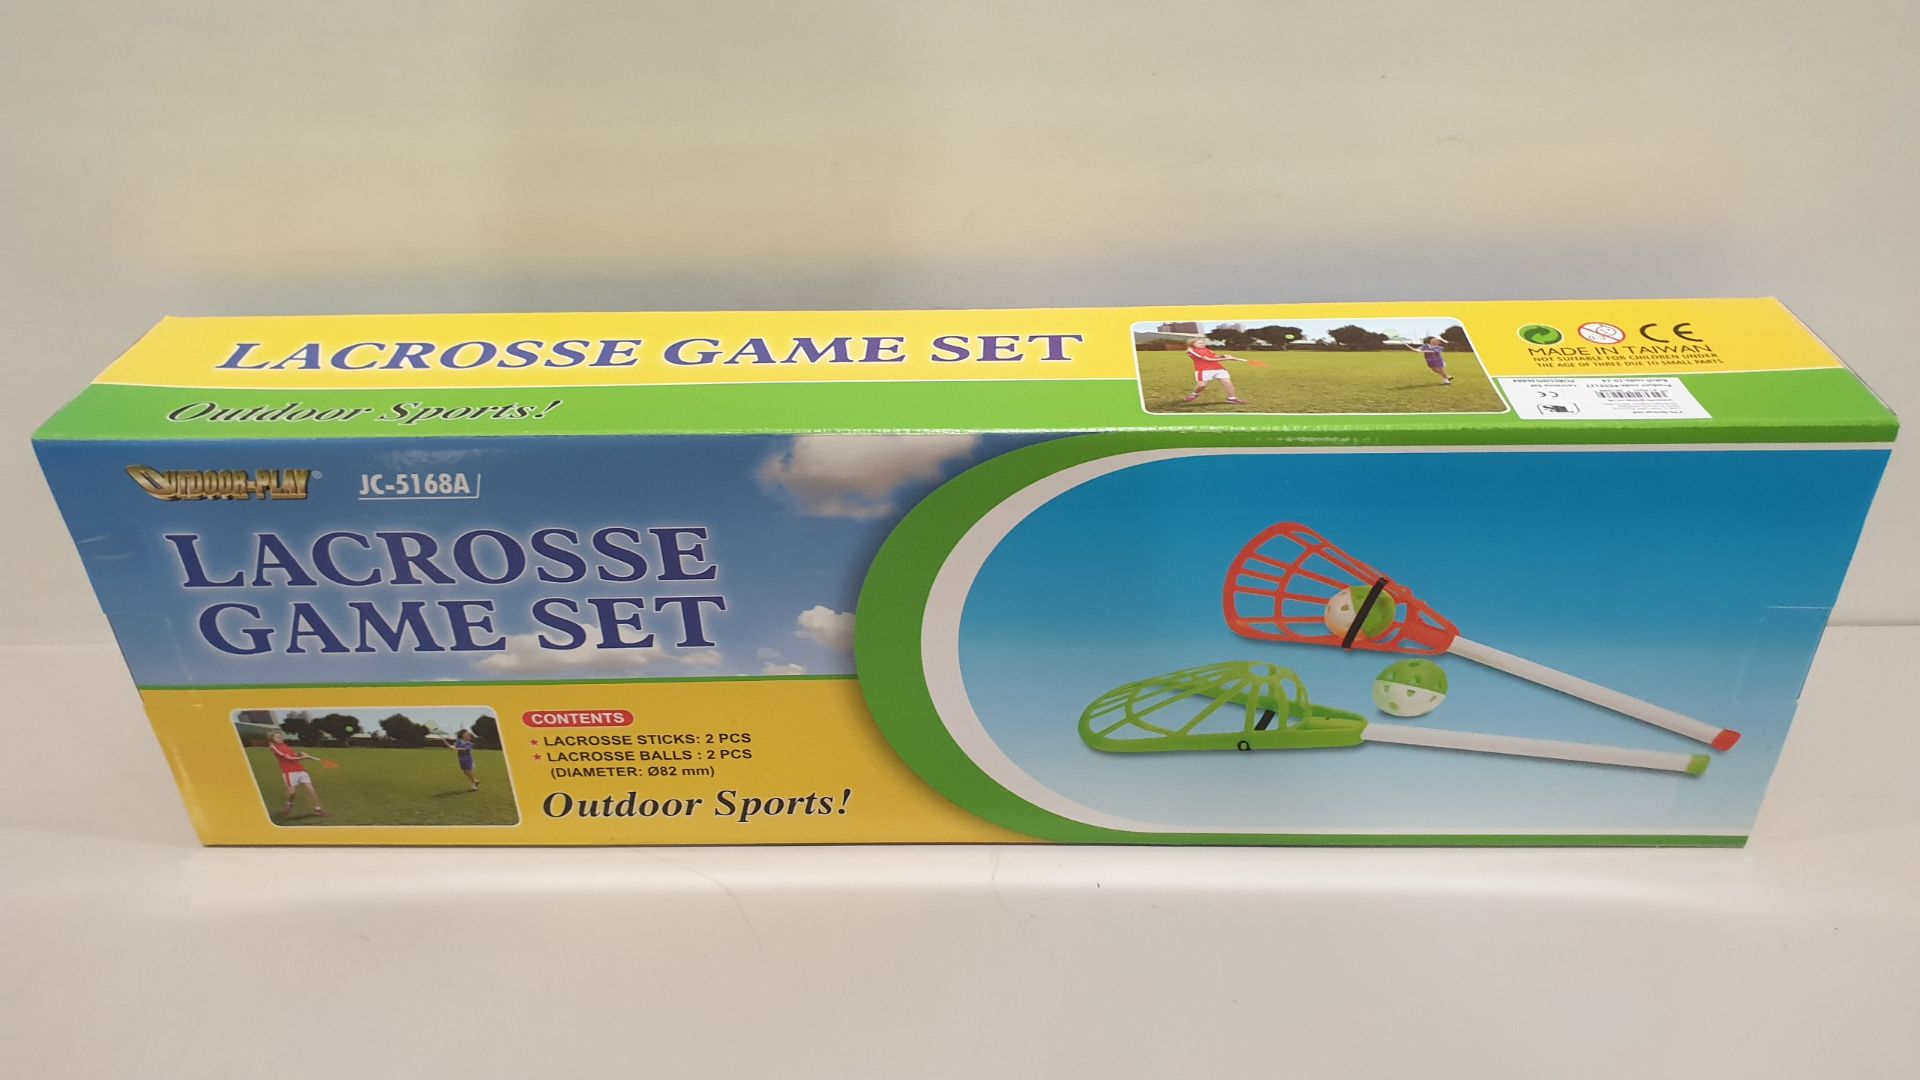 27 X BRAND NEW OUTDOOR-PLAY (JC-5168A) LACROSSE GAME SET (CONTAINS 2 LACROSSE STICKS AND 2